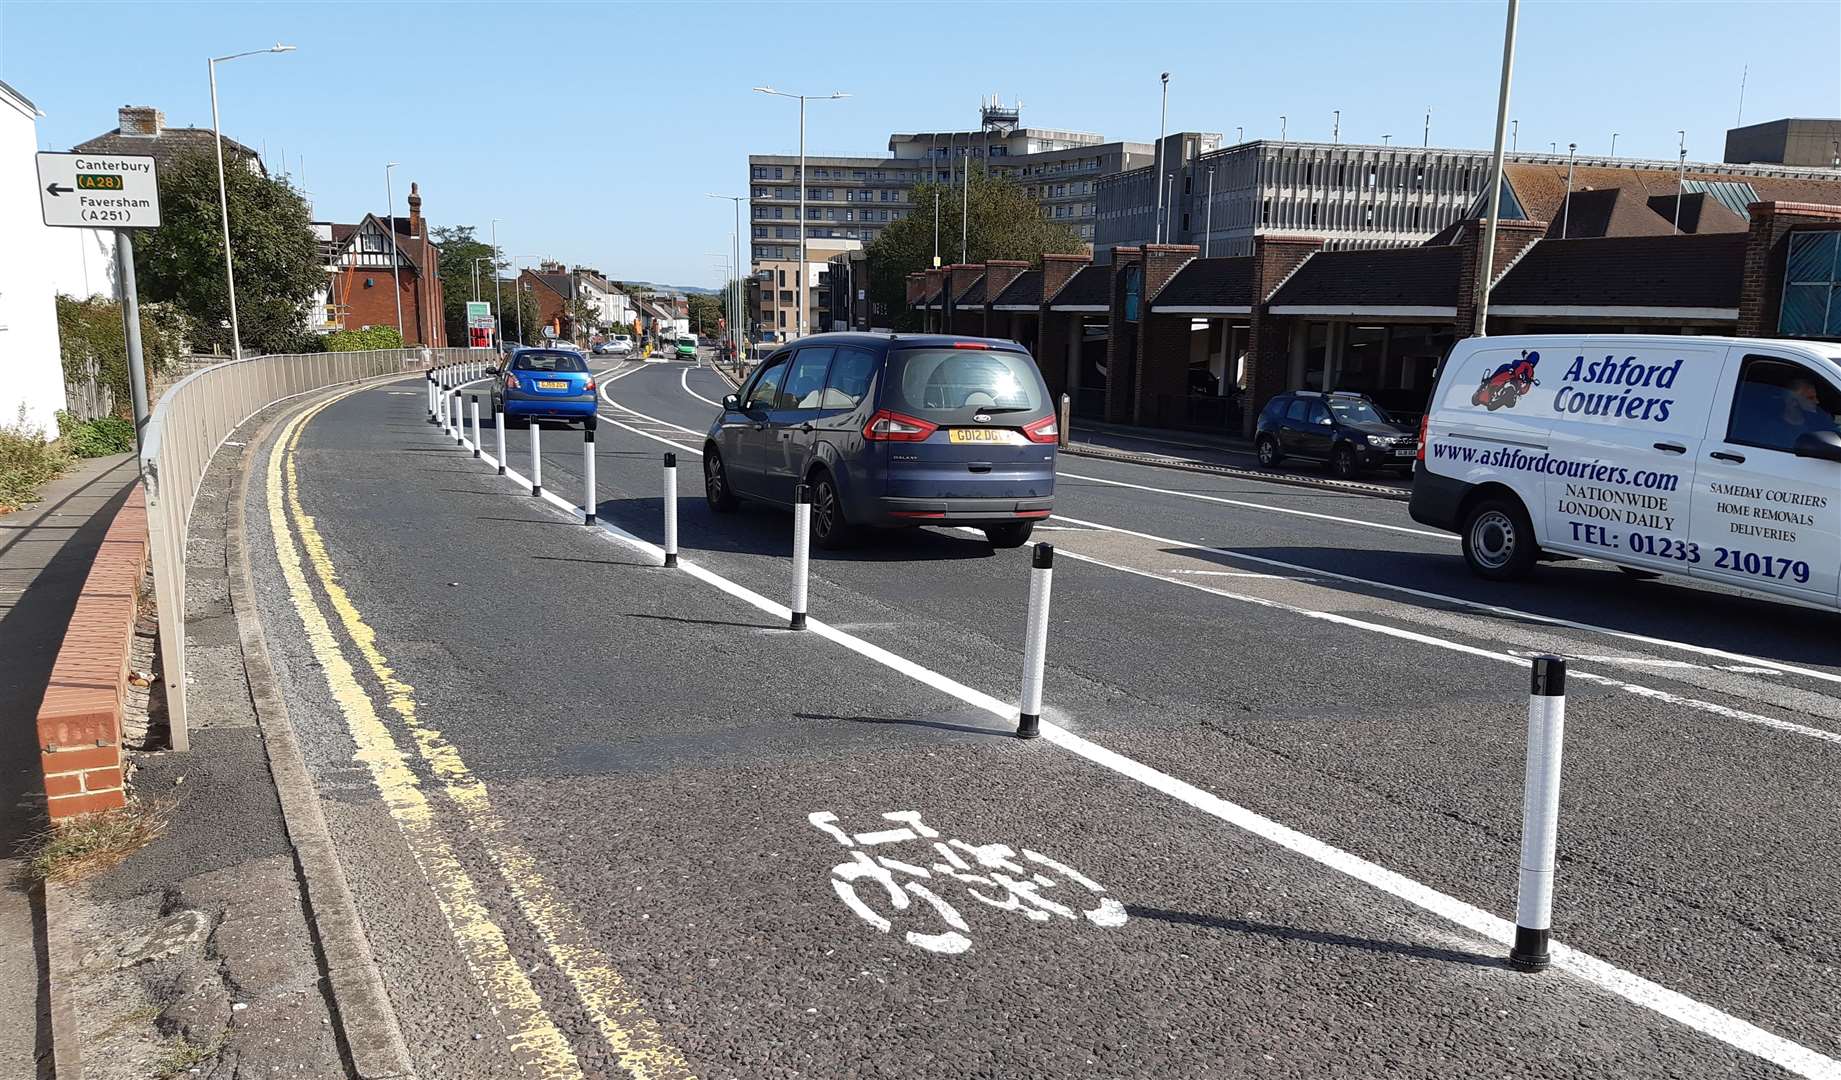 The pop-up cycle lanes in Ashford town centre proved controversial